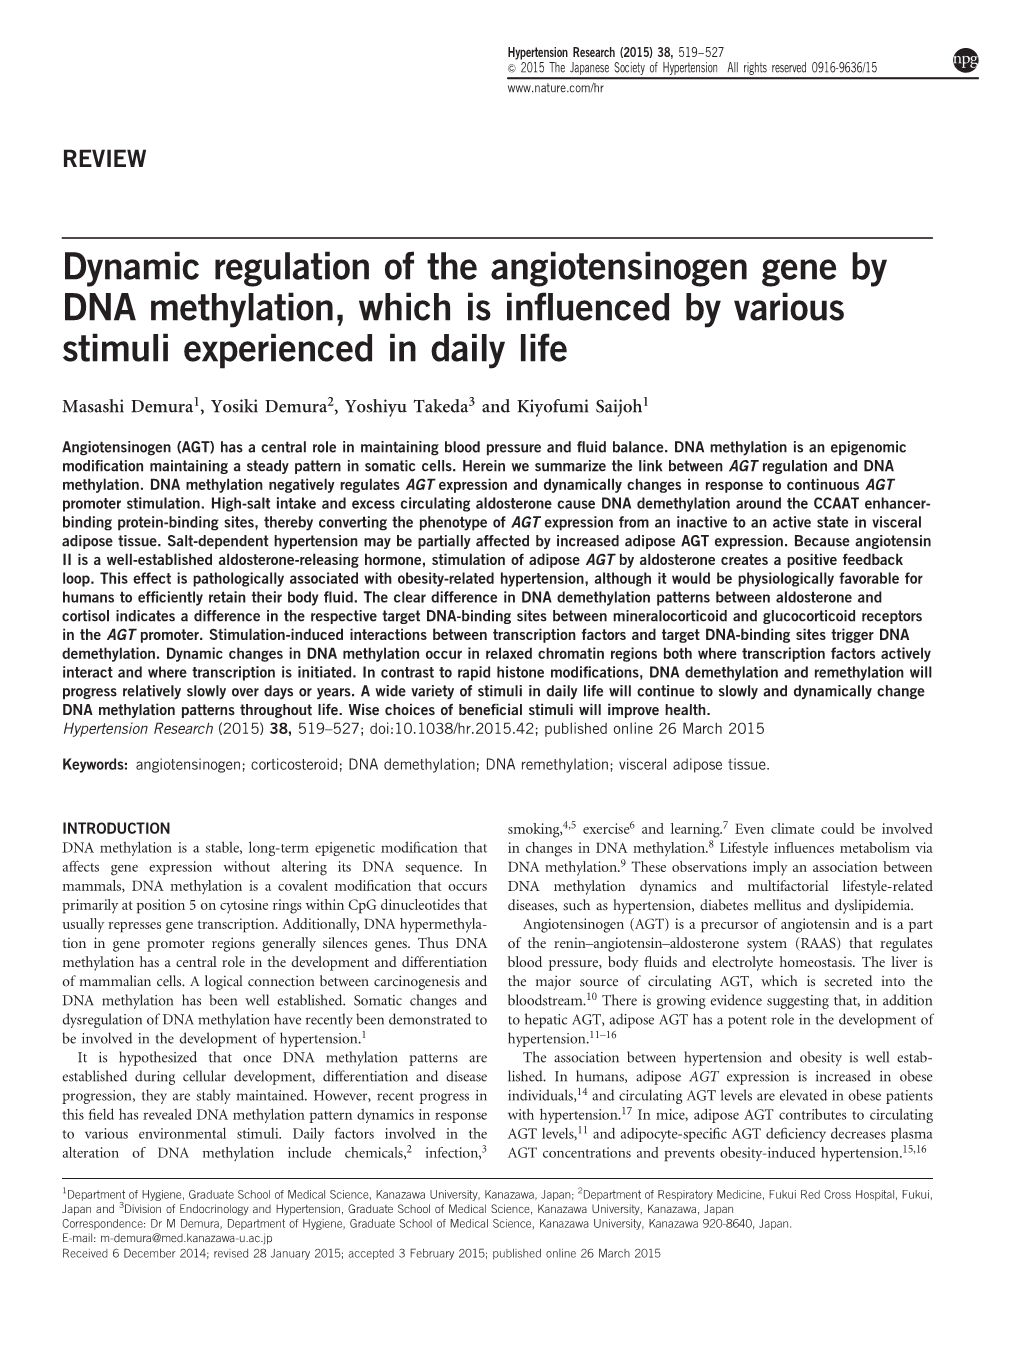 Dynamic Regulation of the Angiotensinogen Gene by DNA Methylation, Which Is Inﬂuenced by Various Stimuli Experienced in Daily Life